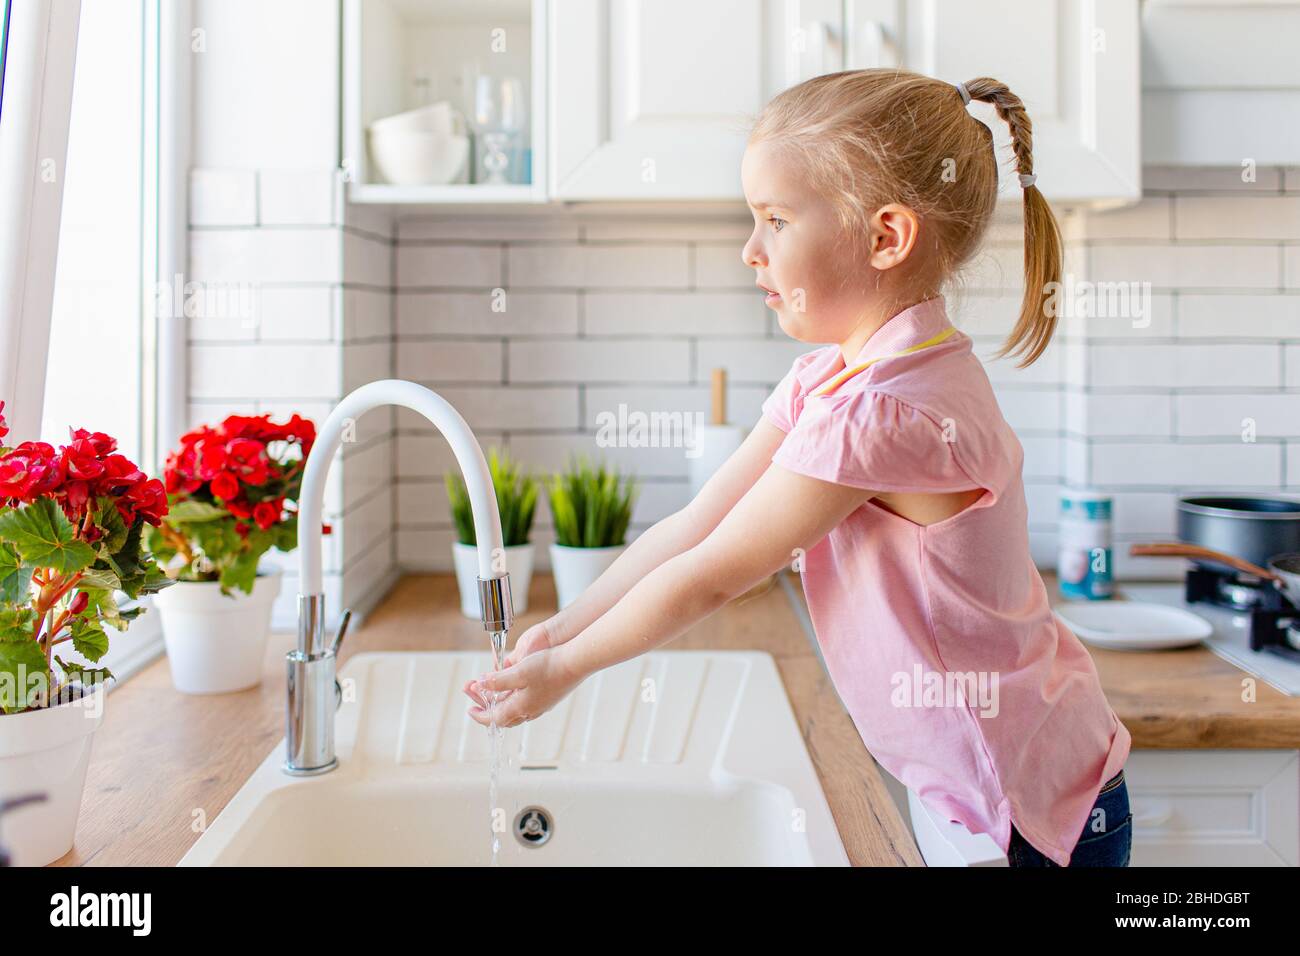 Blonde toddler girl washing hands in the lingh kitchen before eating. Hygiene and healthcare concept Stock Photo